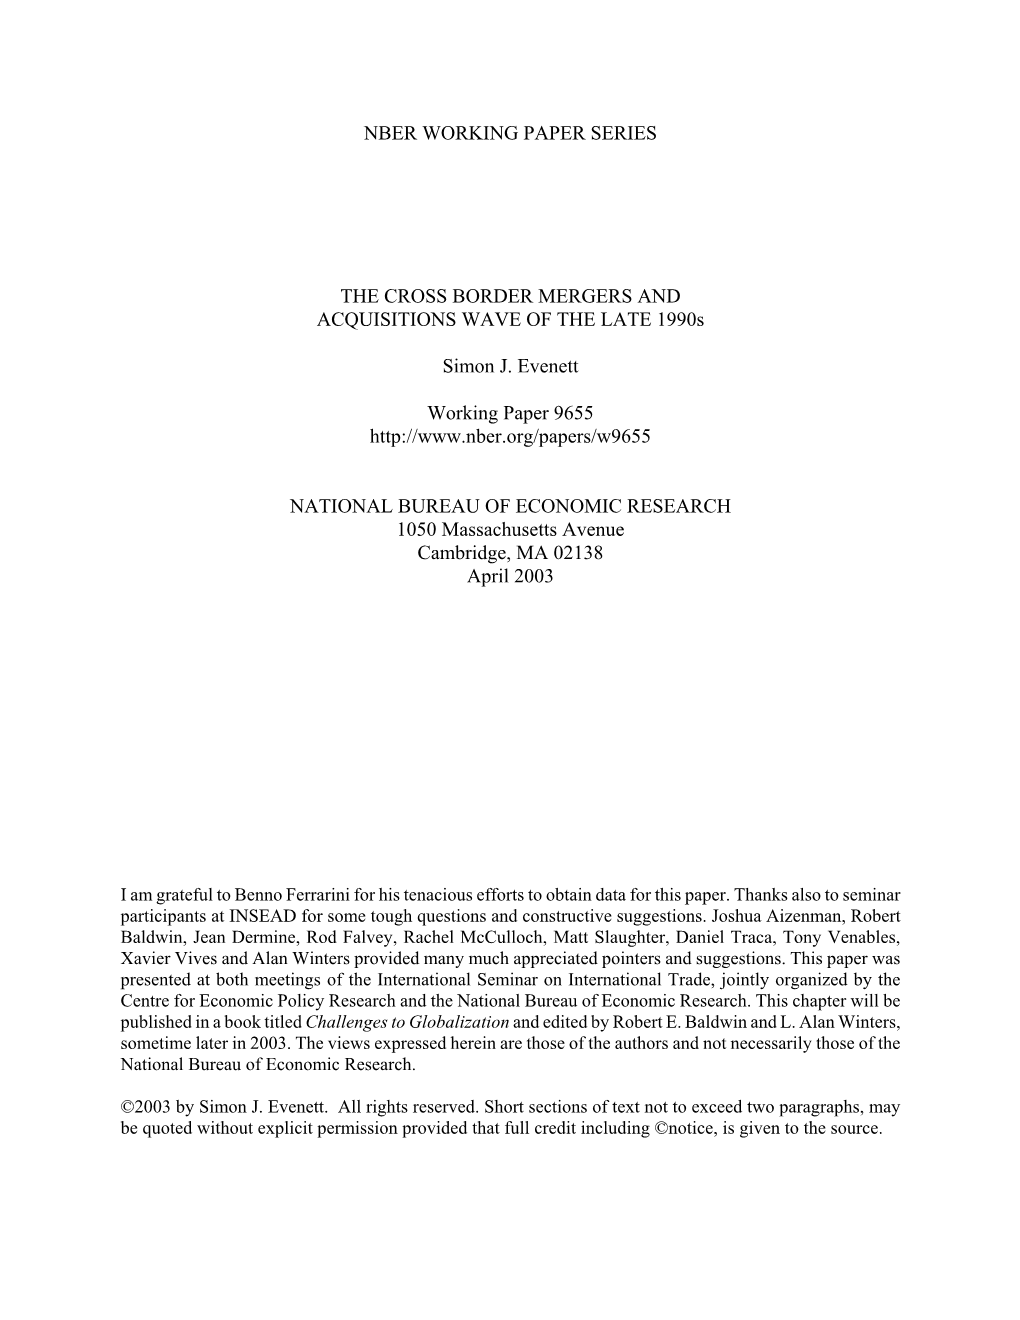 Nber Working Paper Series the Cross Border Mergers